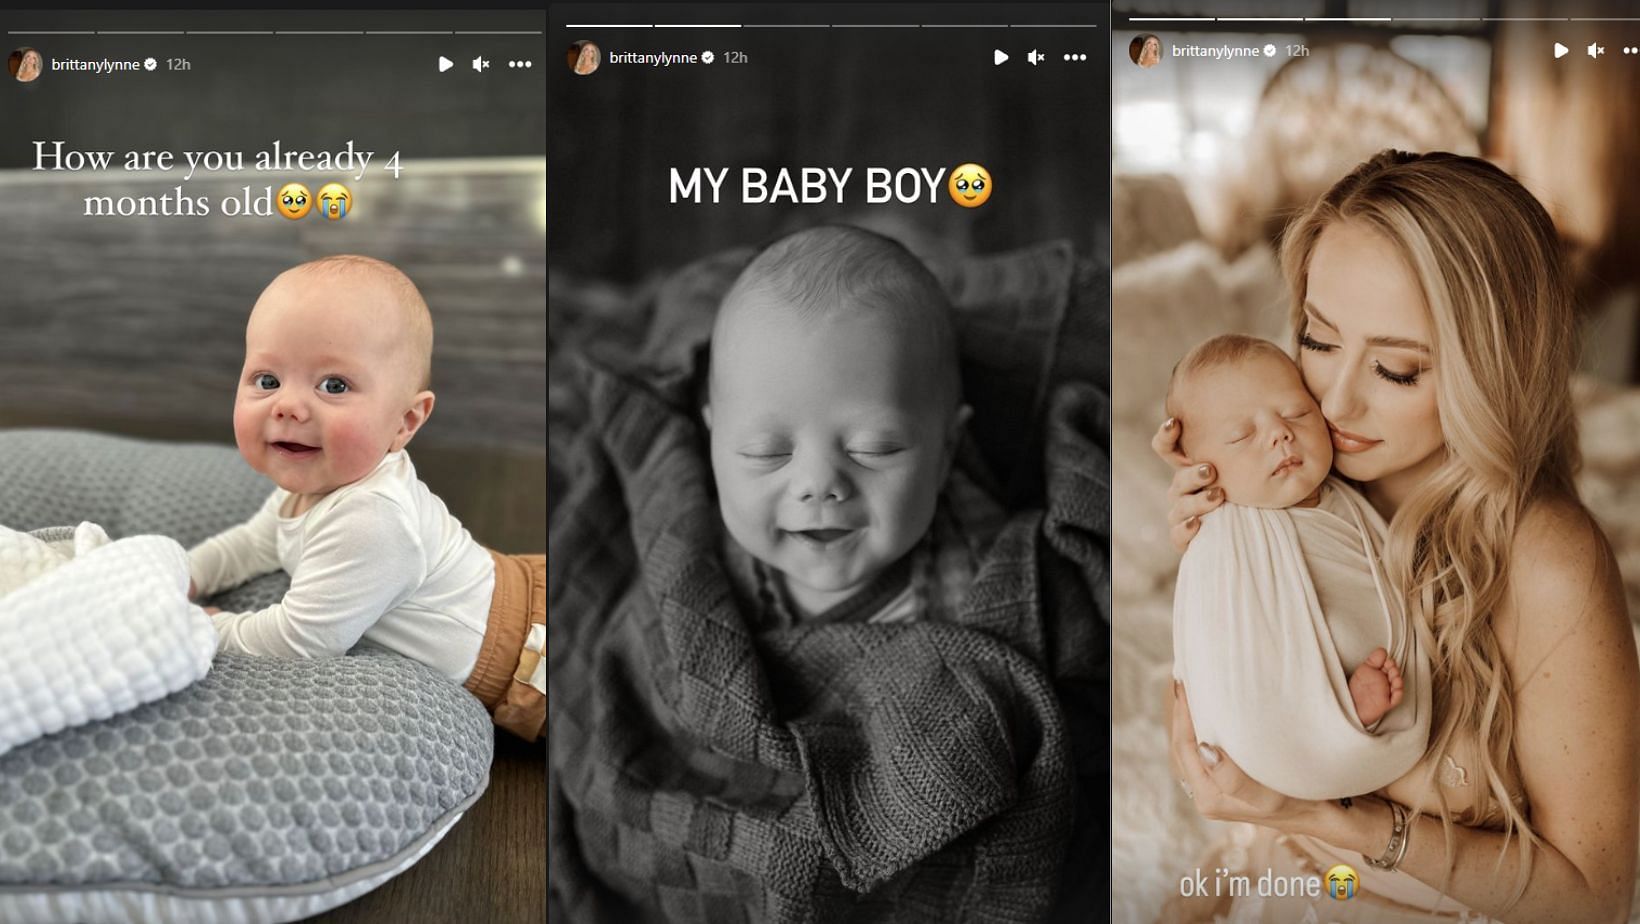 Brittany Mahomes shared lovely pics of her son on Instagram